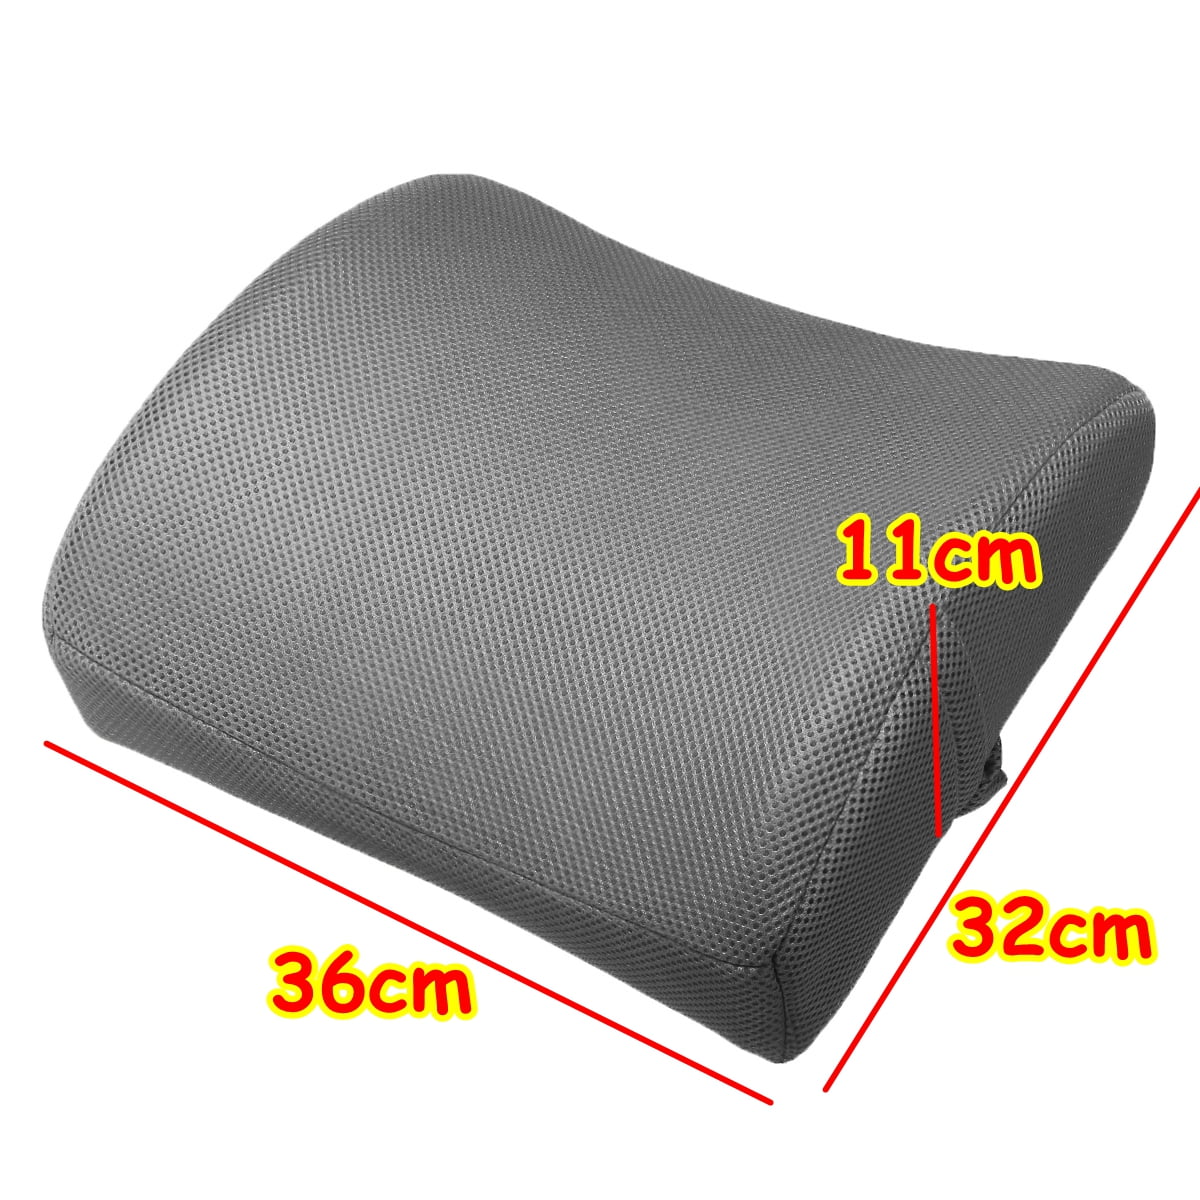 Lumbar Support Pillow for Office Chair,Computer/Desk Chair/Couch,Back  Support Pillow Adjustable,Breathable Mesh Cover,Patented 6-fold  semicircular